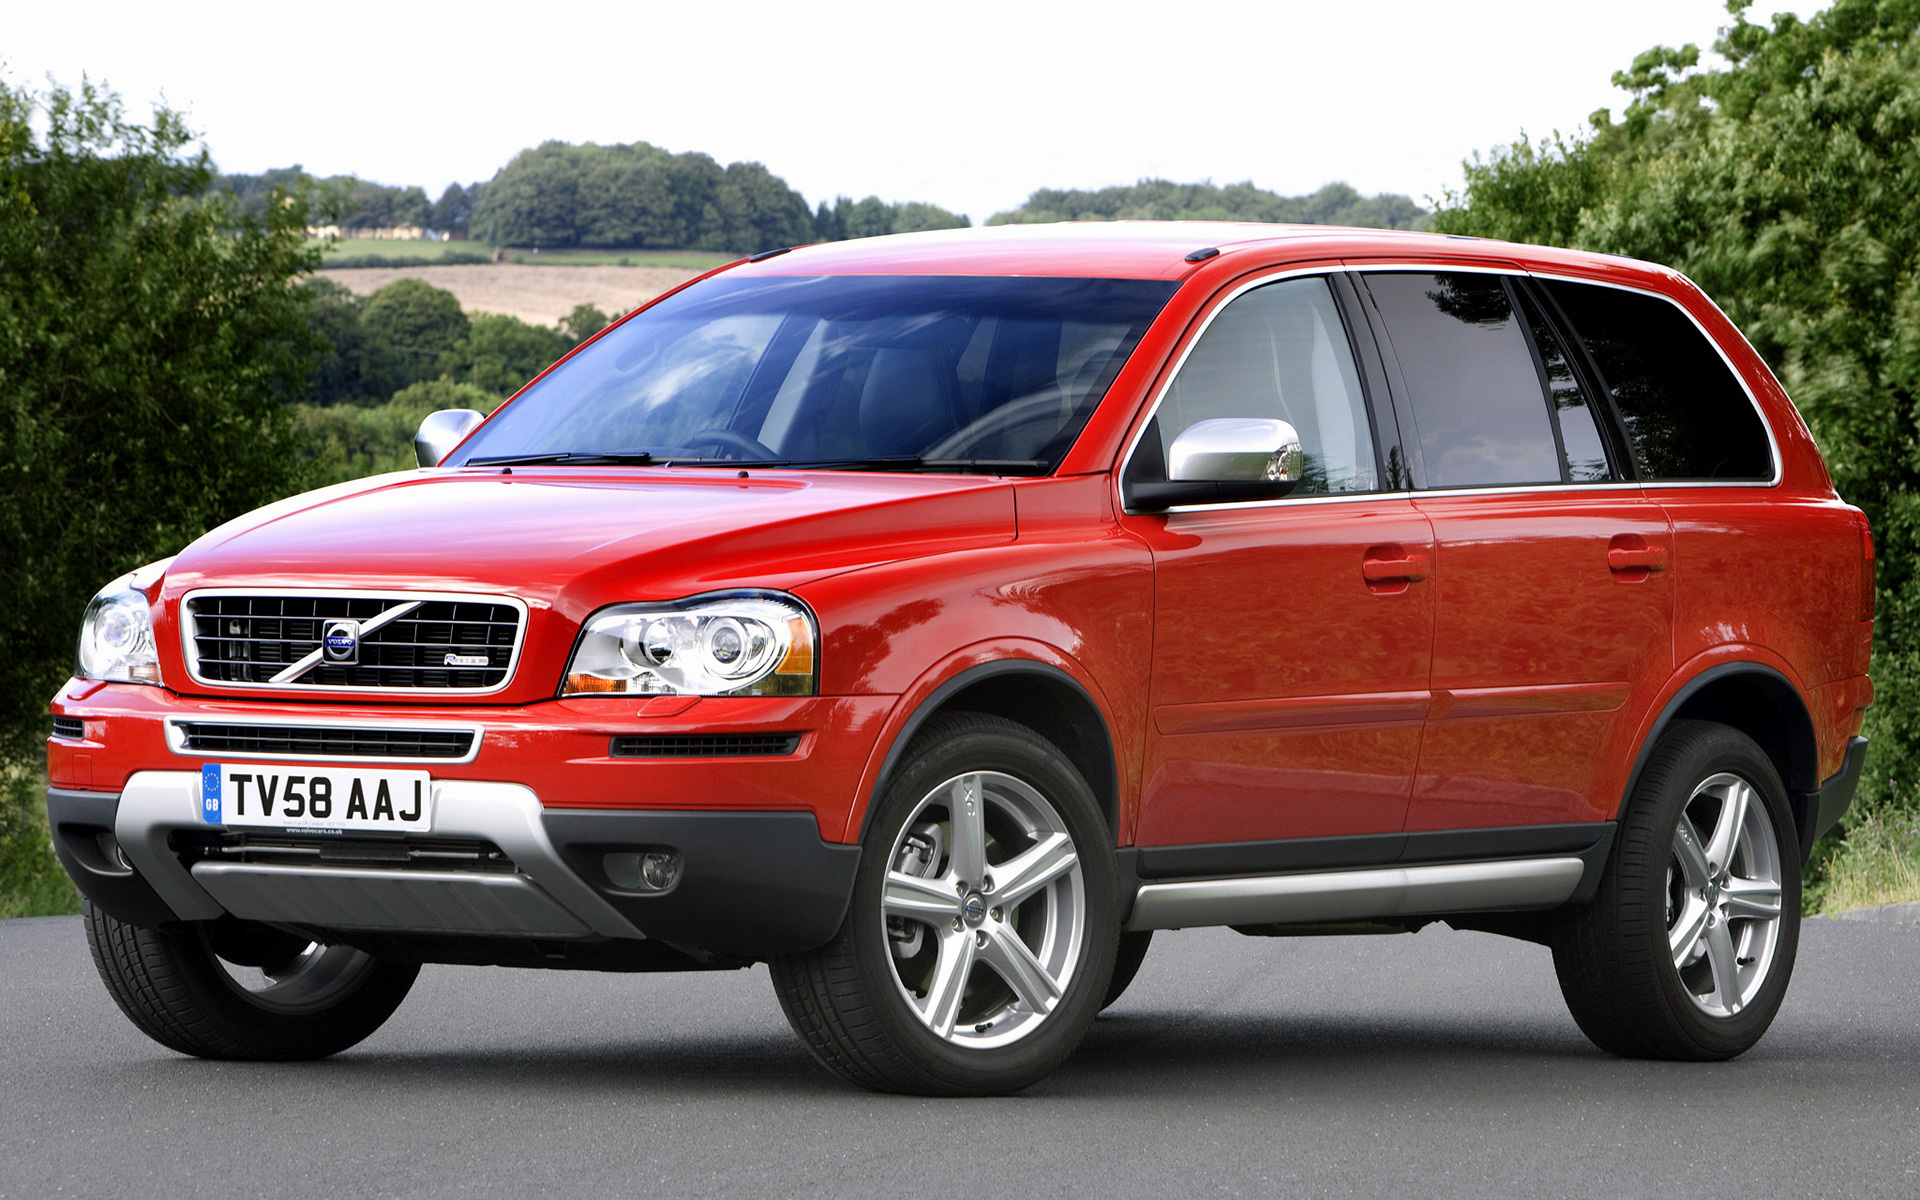 2008 Volvo XC90 V8 R-Design (UK) - Wallpapers and HD Images | Car Pixel